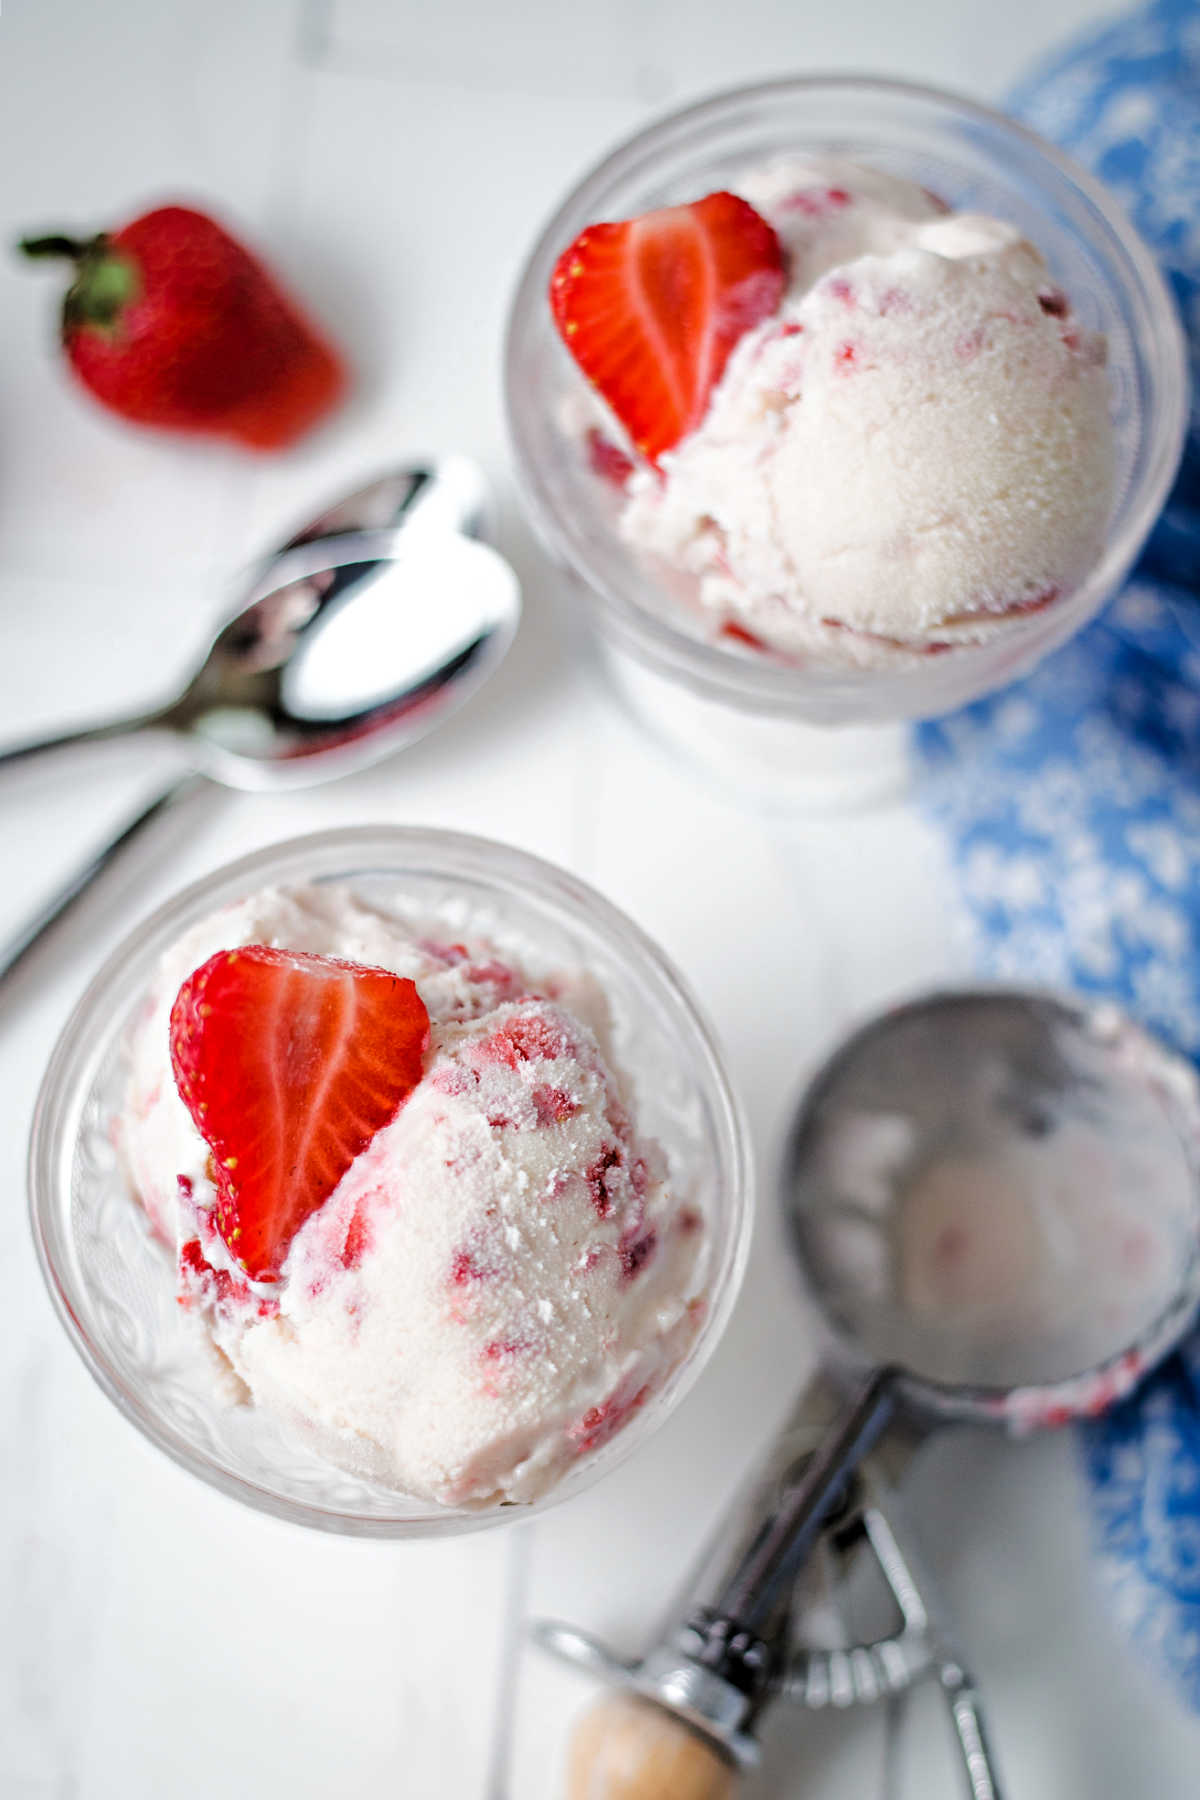 two ice cream bowls with scoops of homemade strawberry ice cream with an ice cream scoop laying on the table.